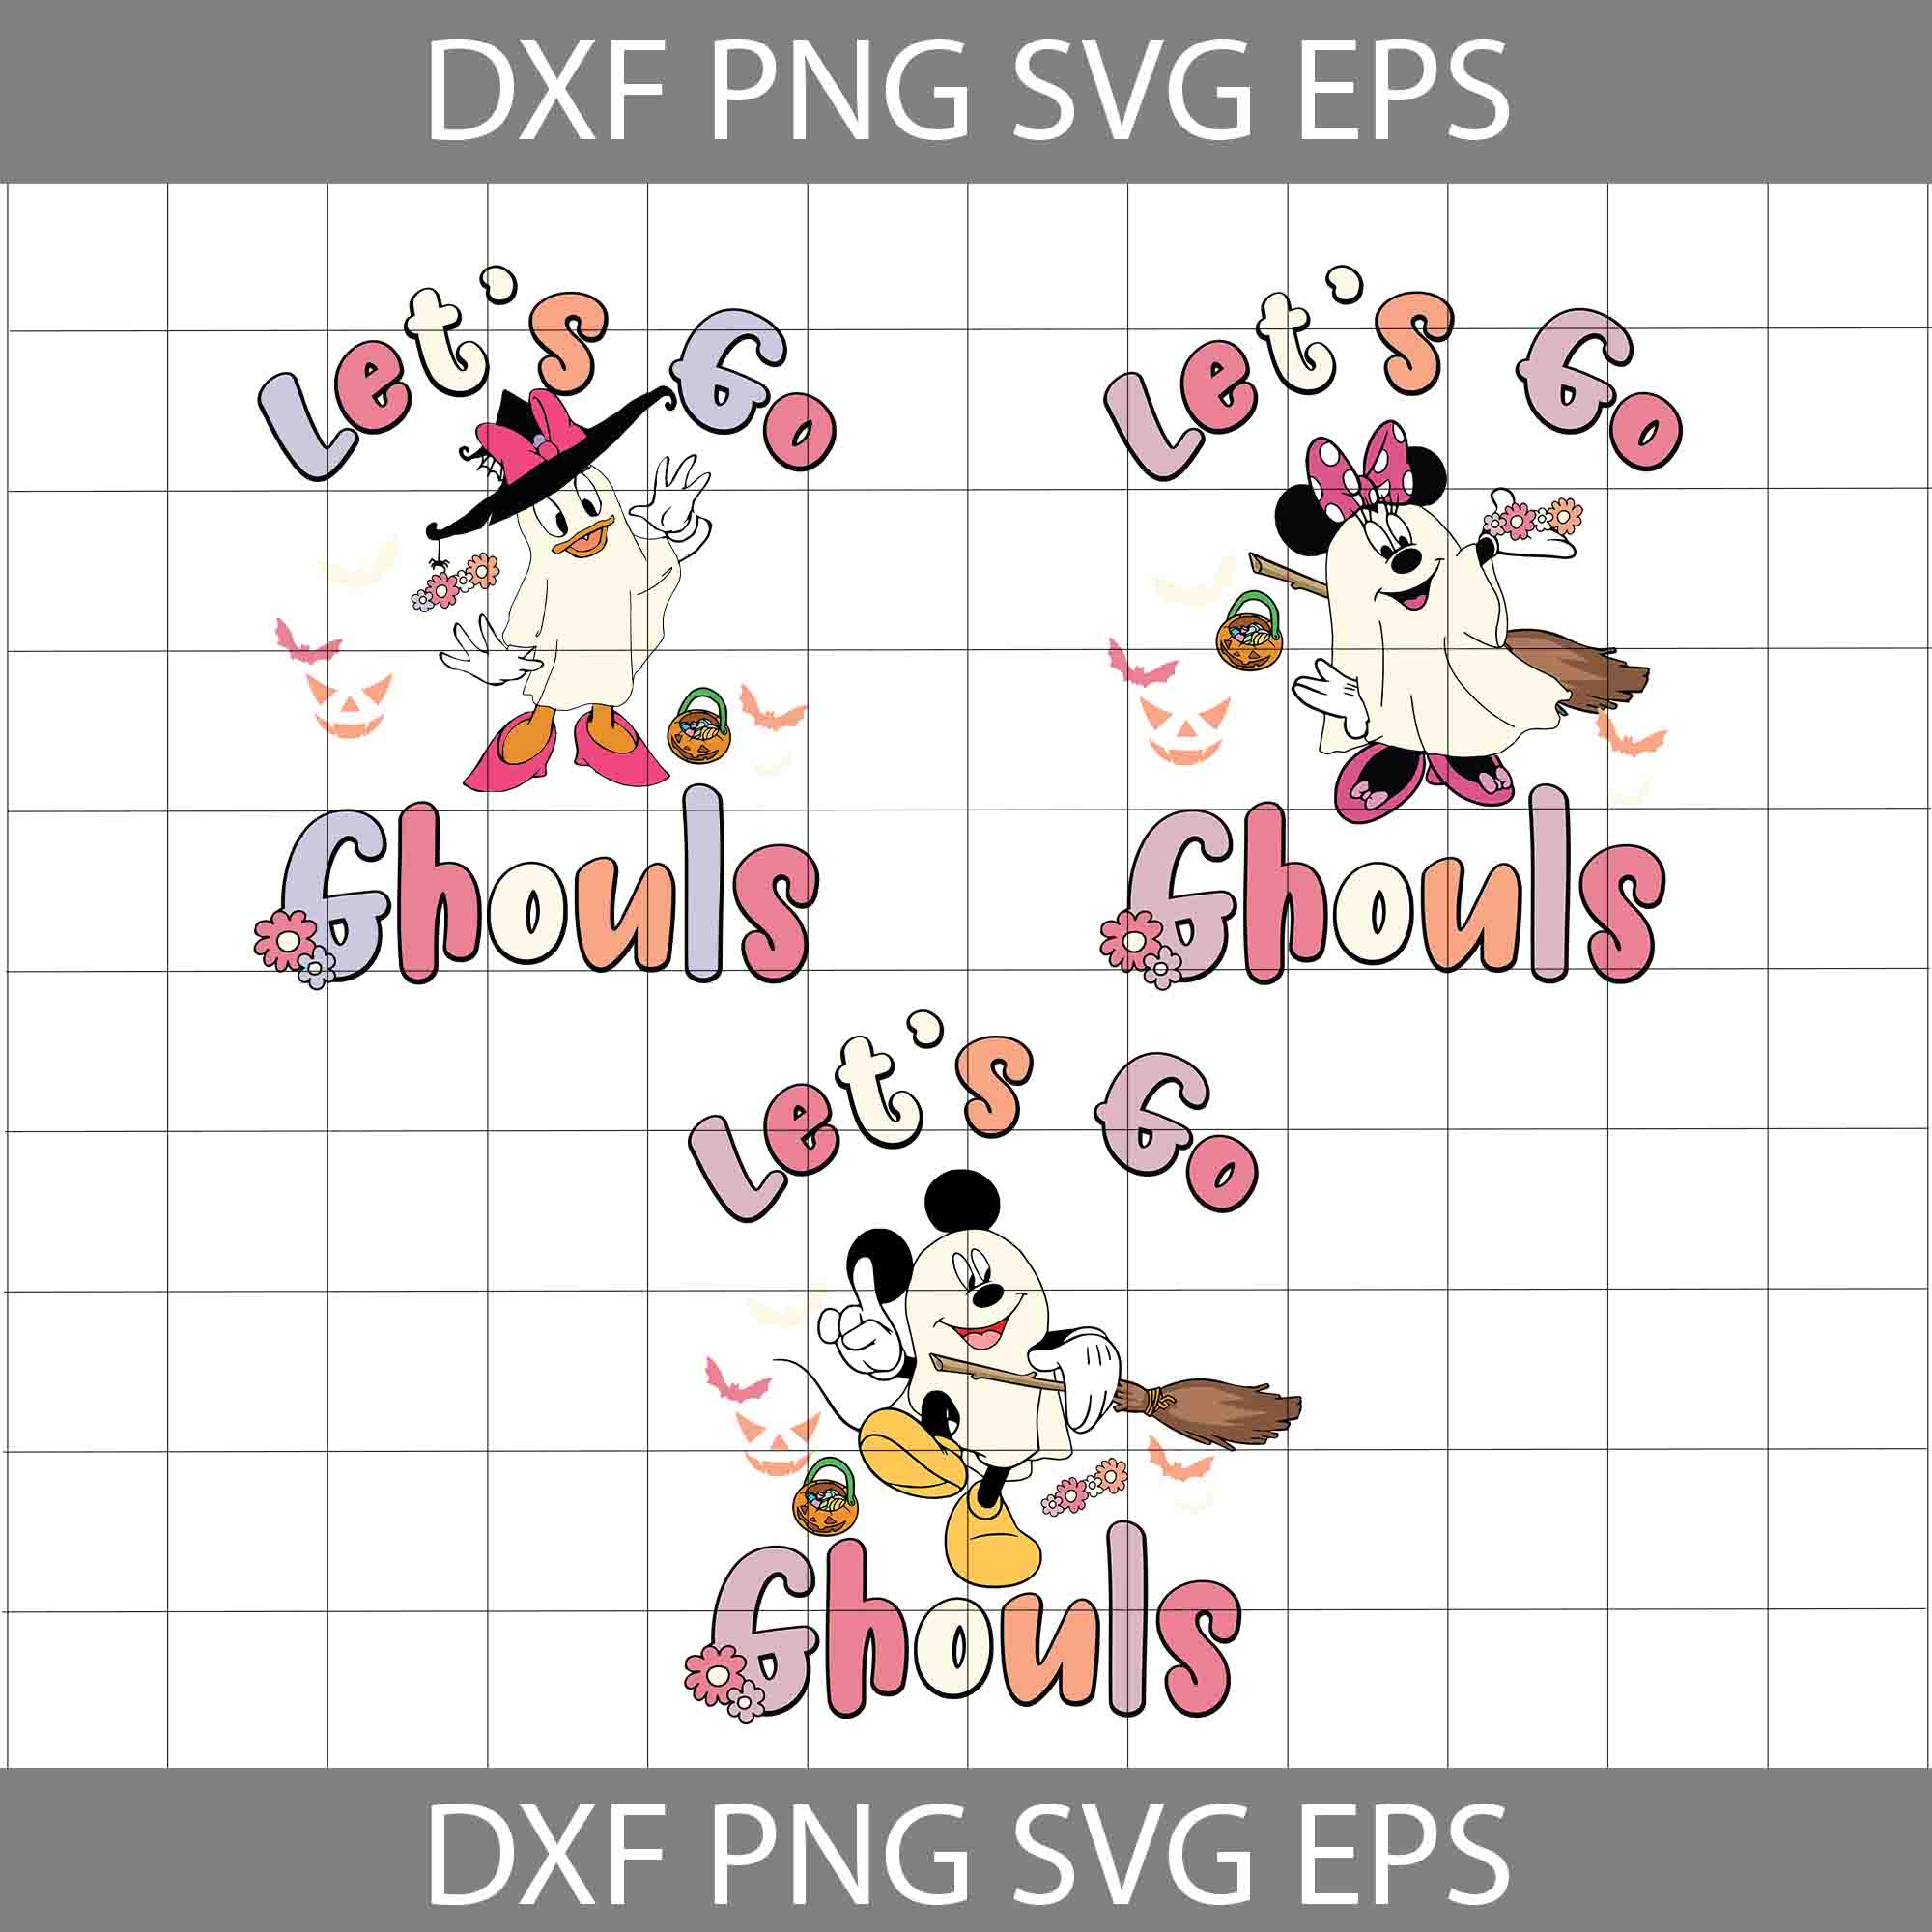 Minnie Mouse SVG, Daisy Duck SVG, Minnie SVG, Mickey Mouse SVG, Minnie  Cricut, PNG, DXF, EPS, Cut Files